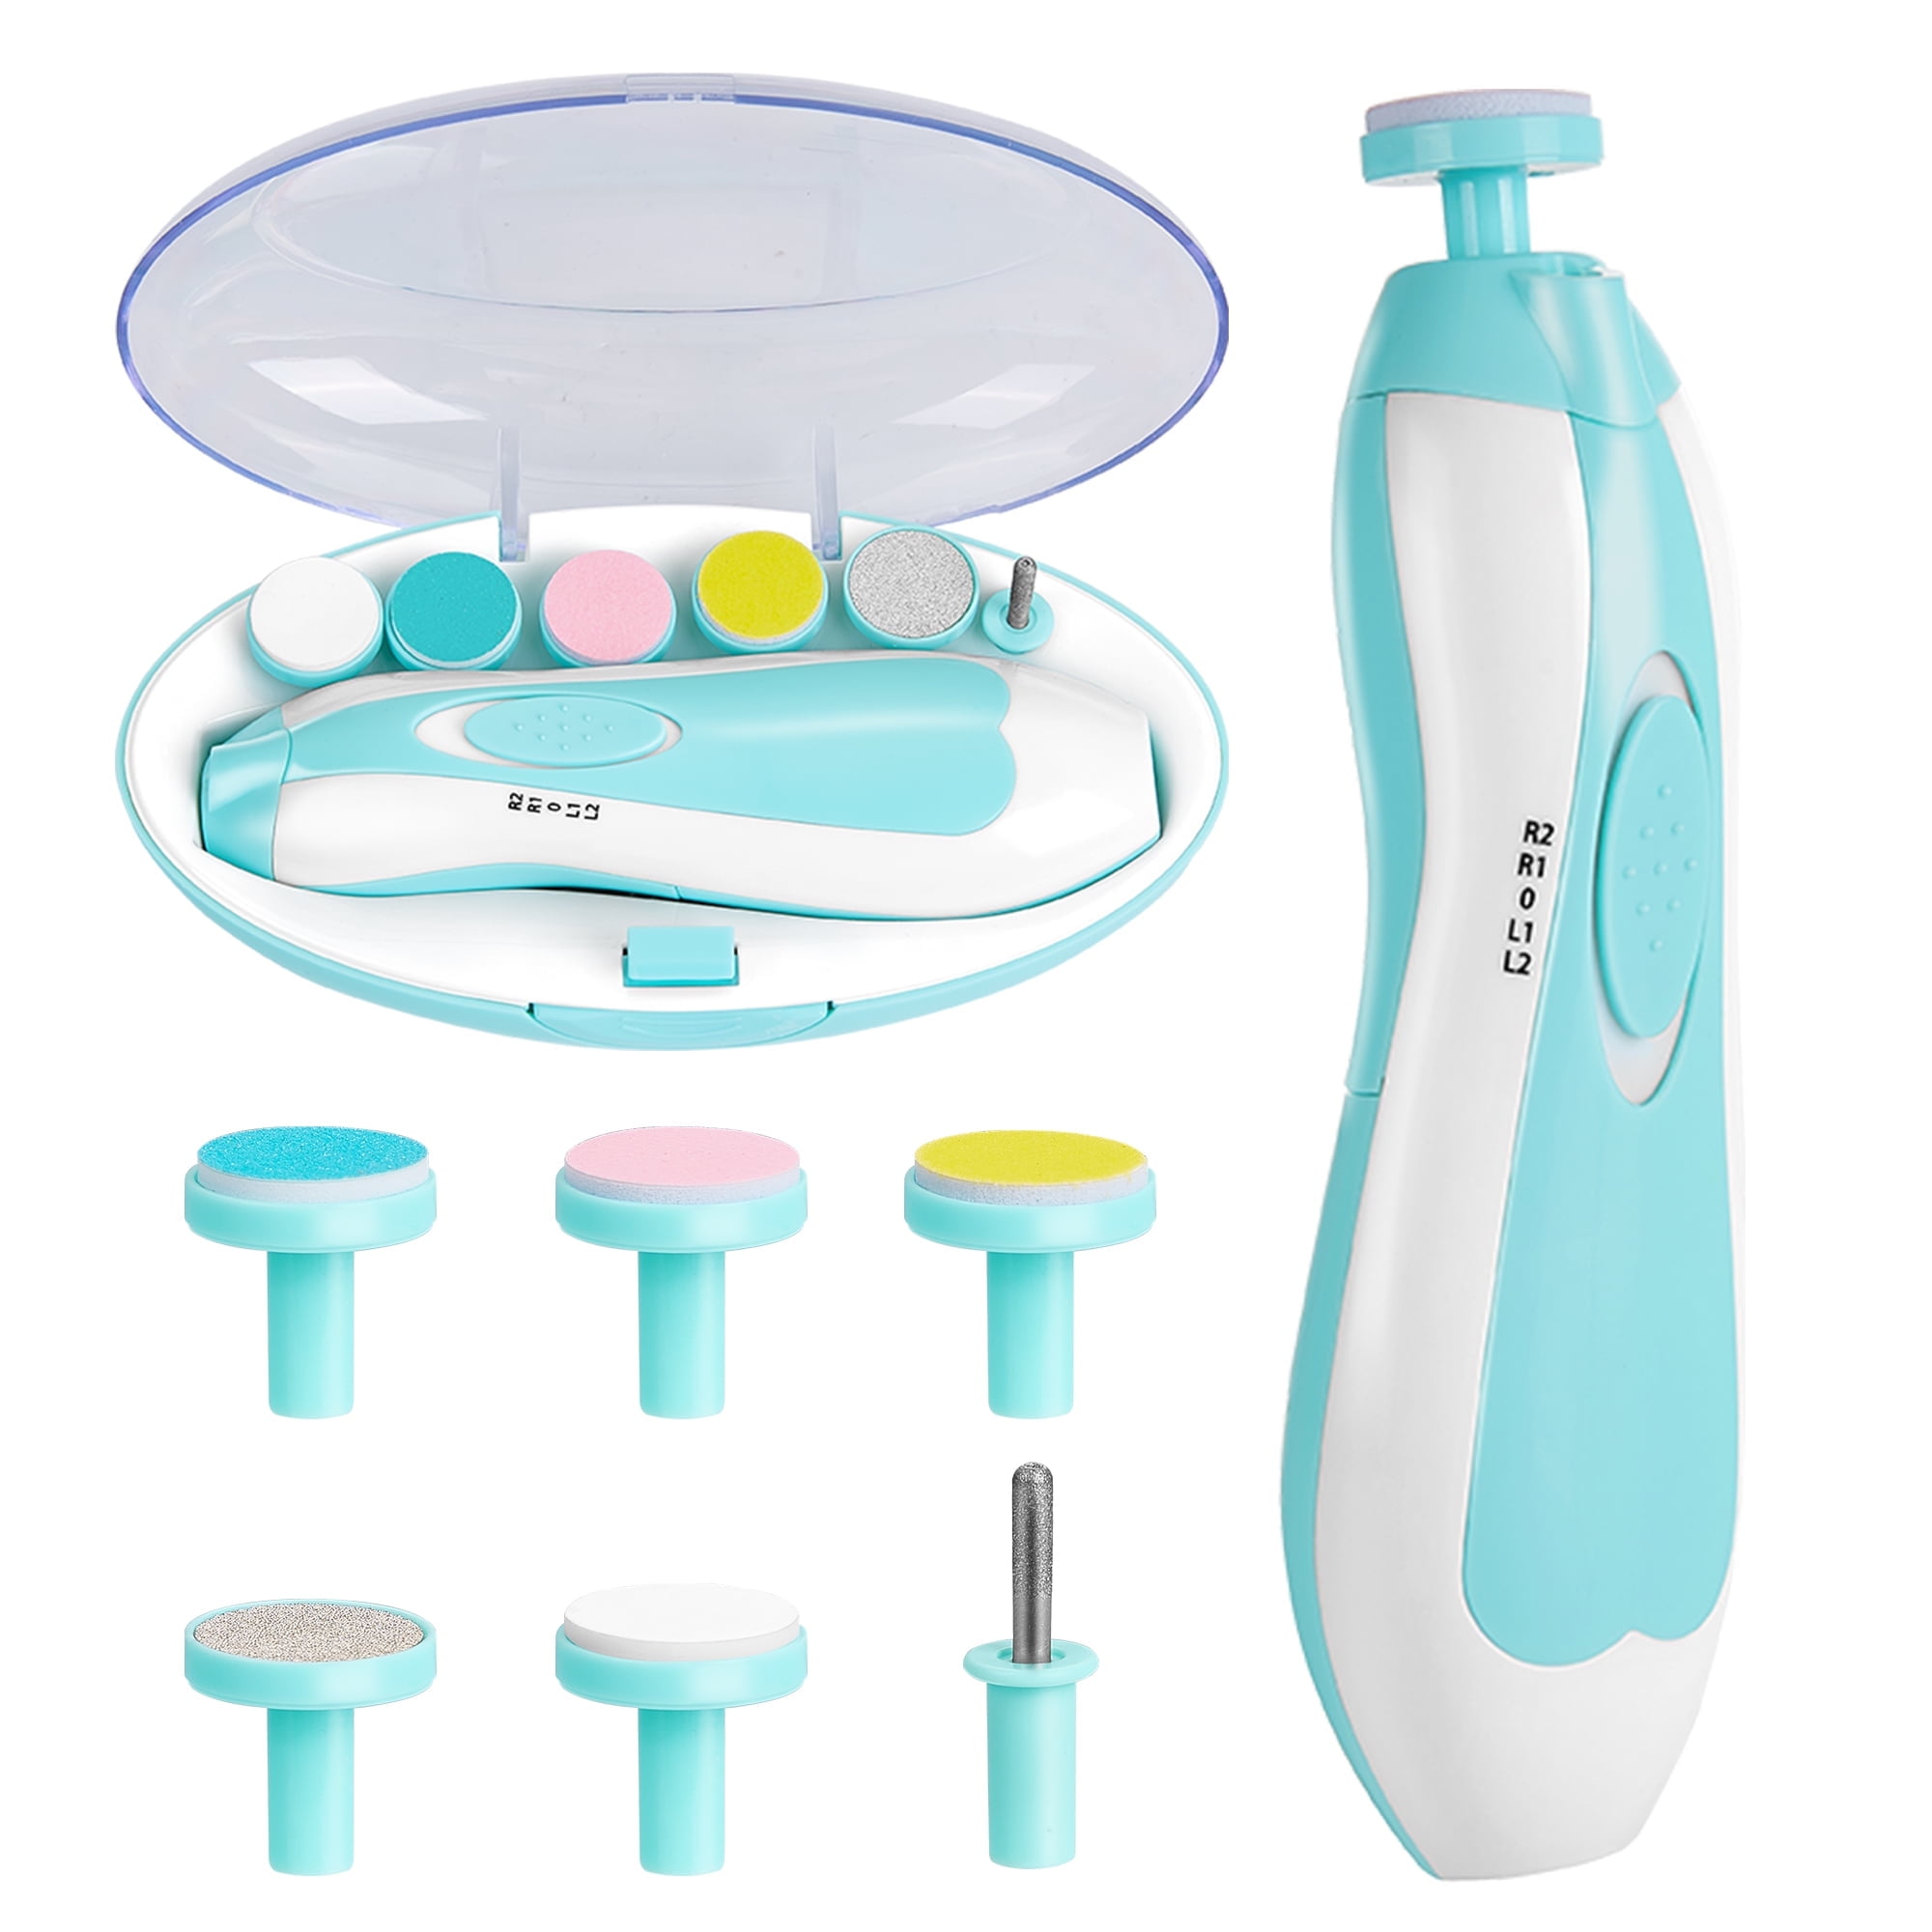 Baby Nail Clippers 6 in 1 Safe Electric Baby Nail Trimmer, Baby Nail File  Kit, Newborn Toddler Toes and Fingernails, Trim and Polish (Pink & Blue) -  Walmart.com